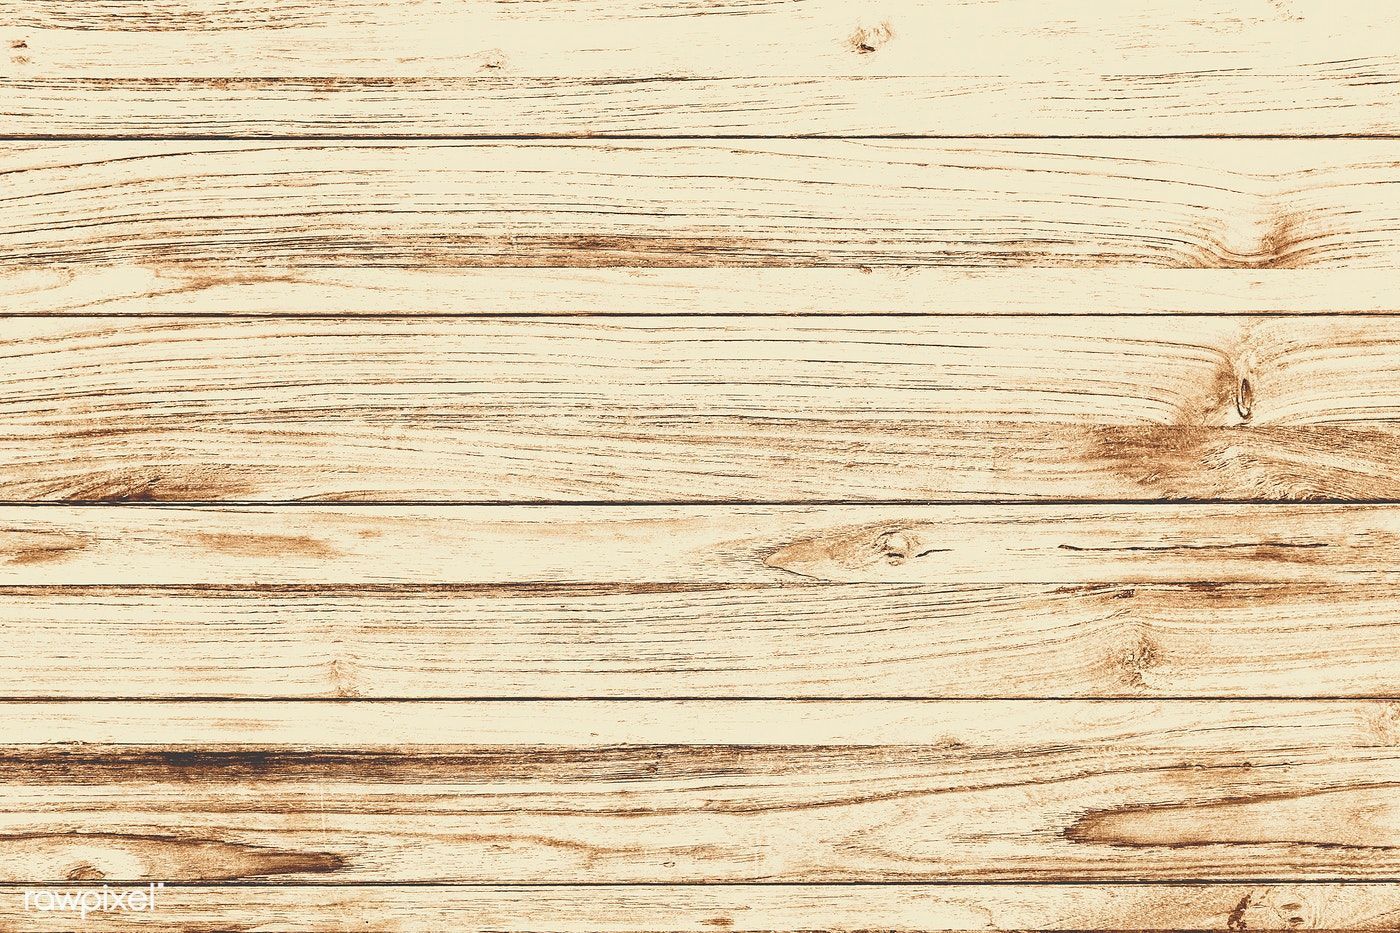 Download premium image of Vintage wooden plank textured background 577140. Textured background, Wooden planks, Painted wood texture